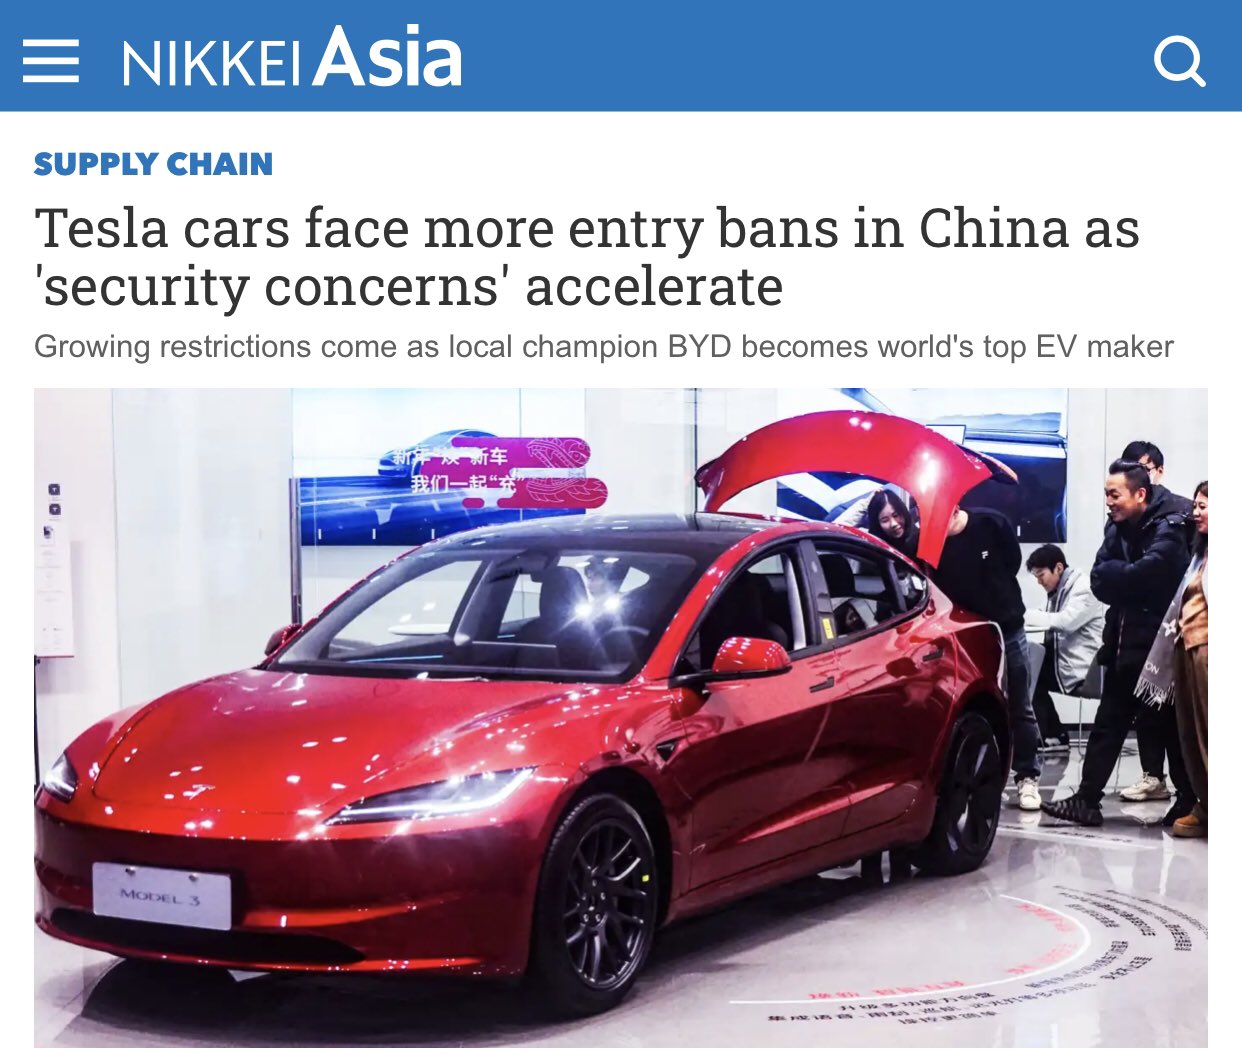 Byron Wan on X: "A growing number of 🇨🇳 government affiliates, local authority agencies, highway operators and even cultural and exhibition centers have restricted Tesla cars from entering their premises since last